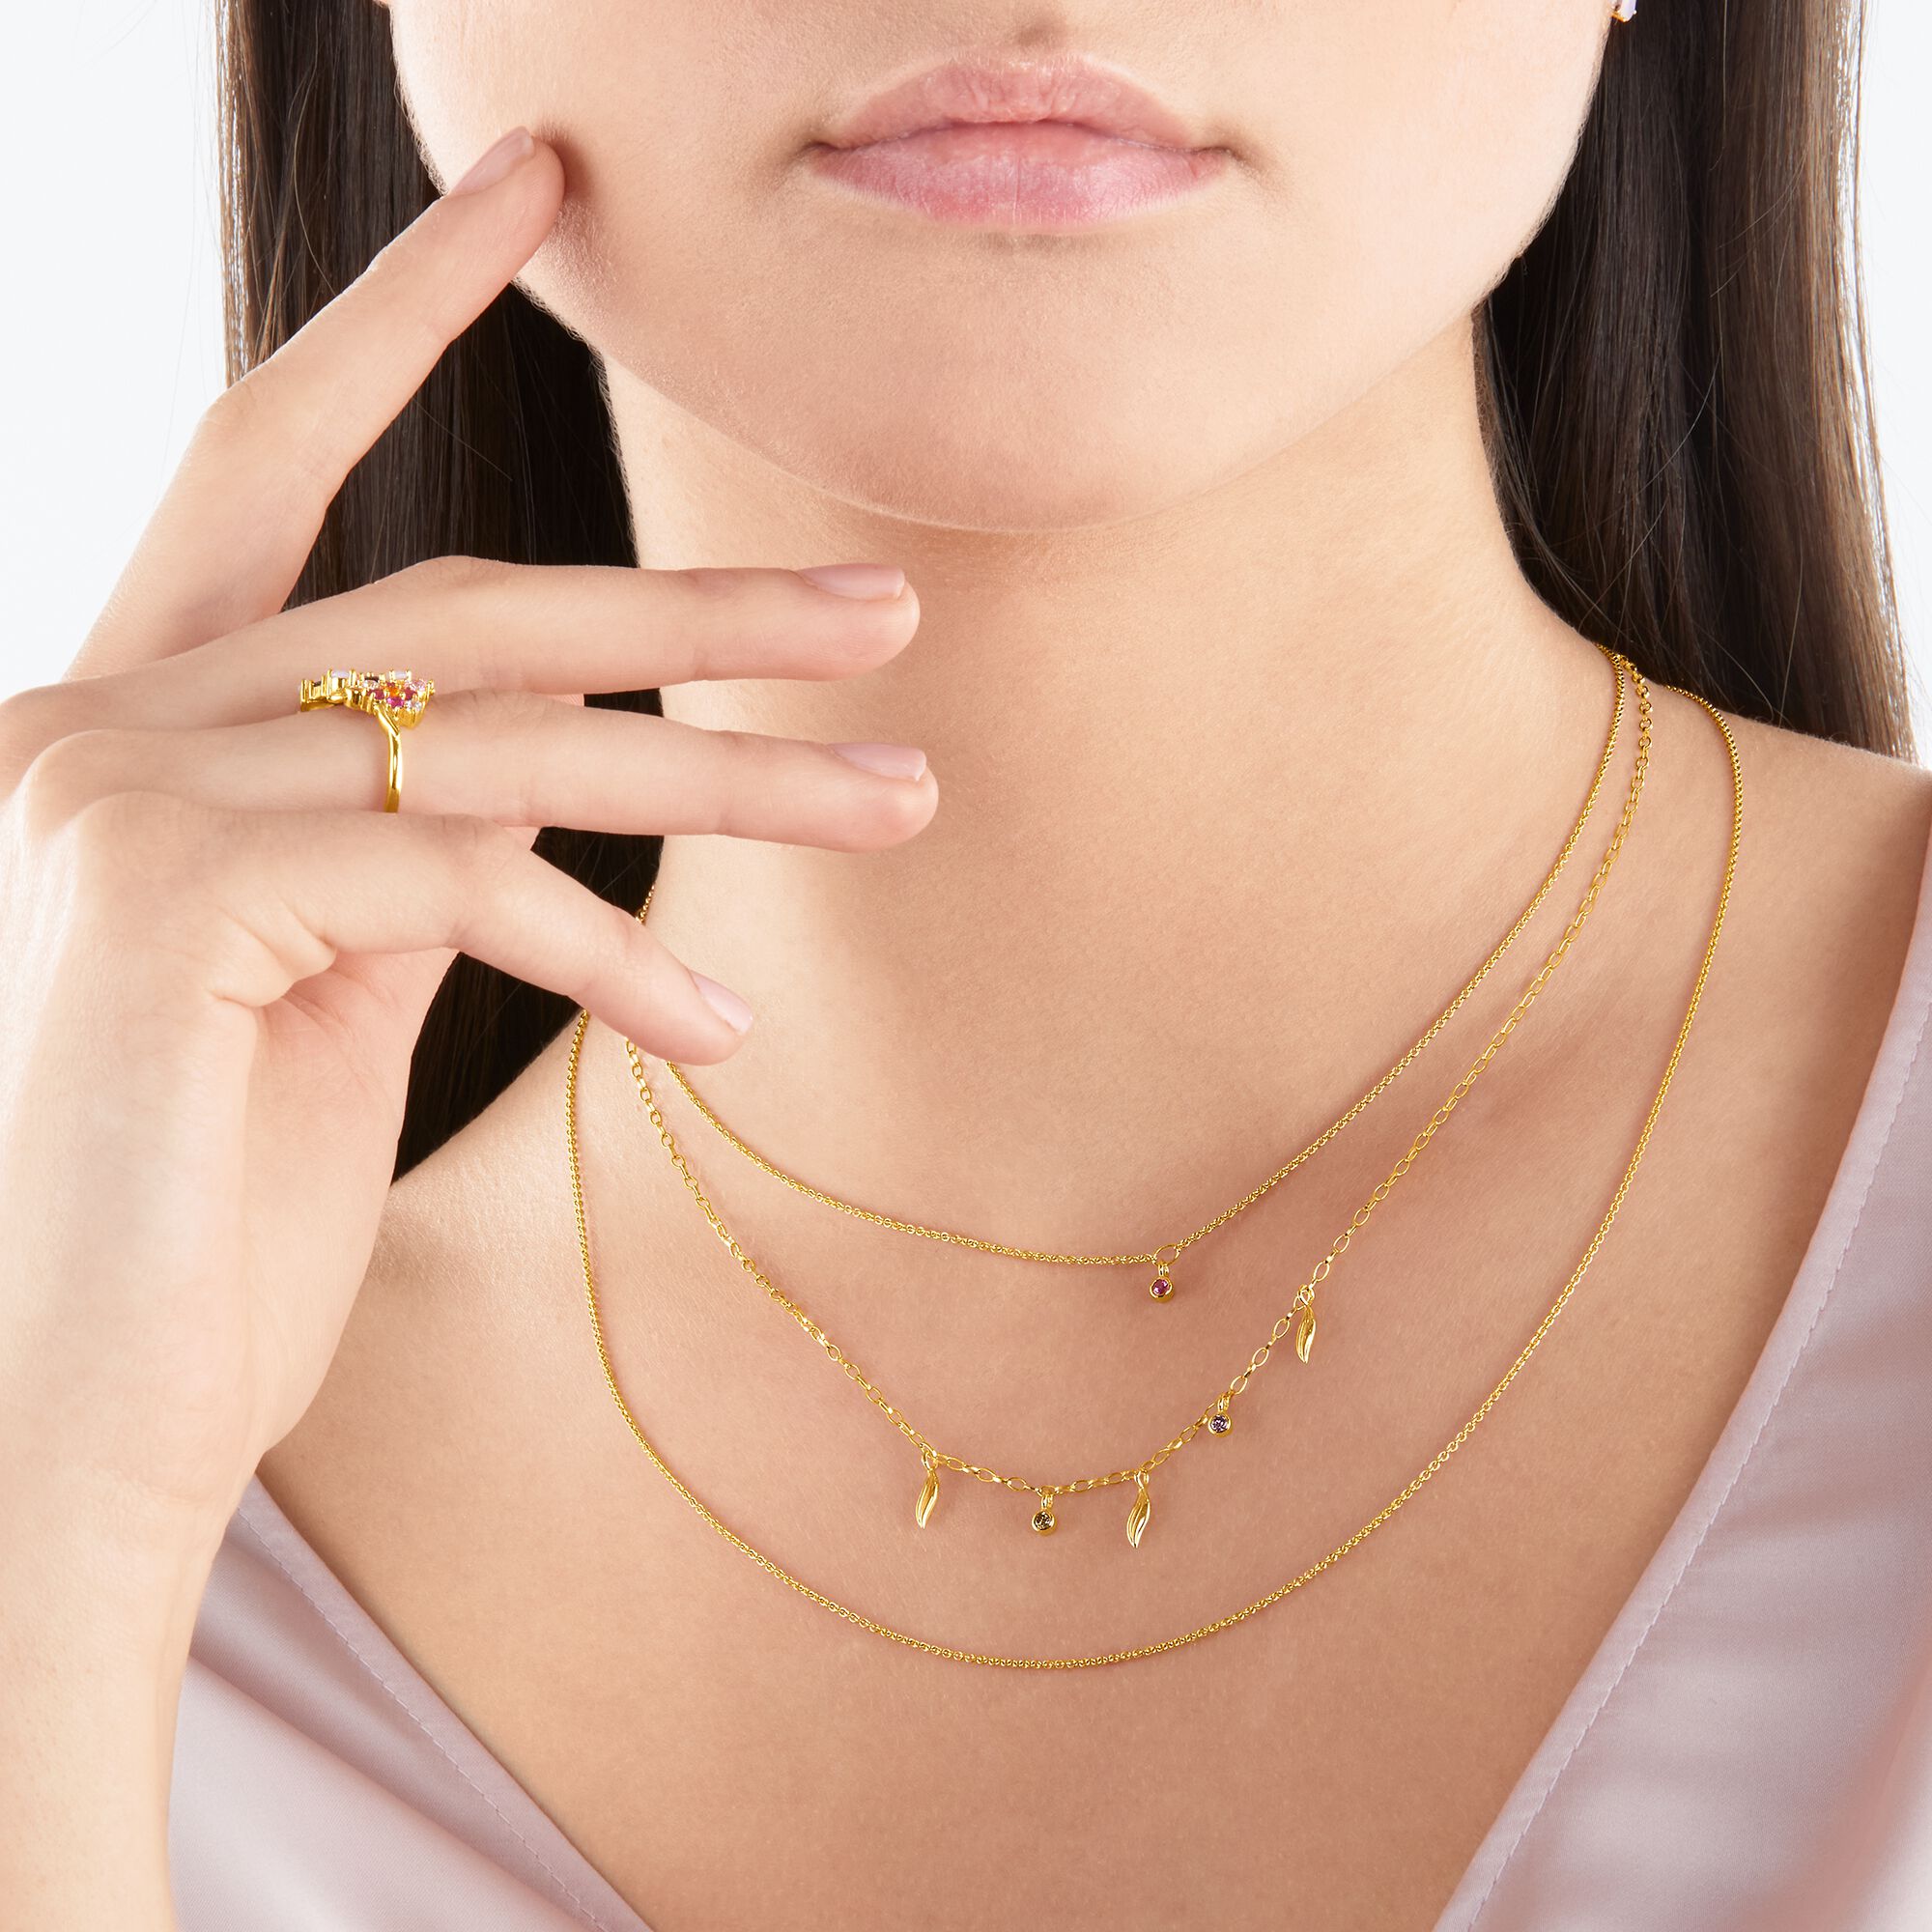 Golden necklace in Layering-style